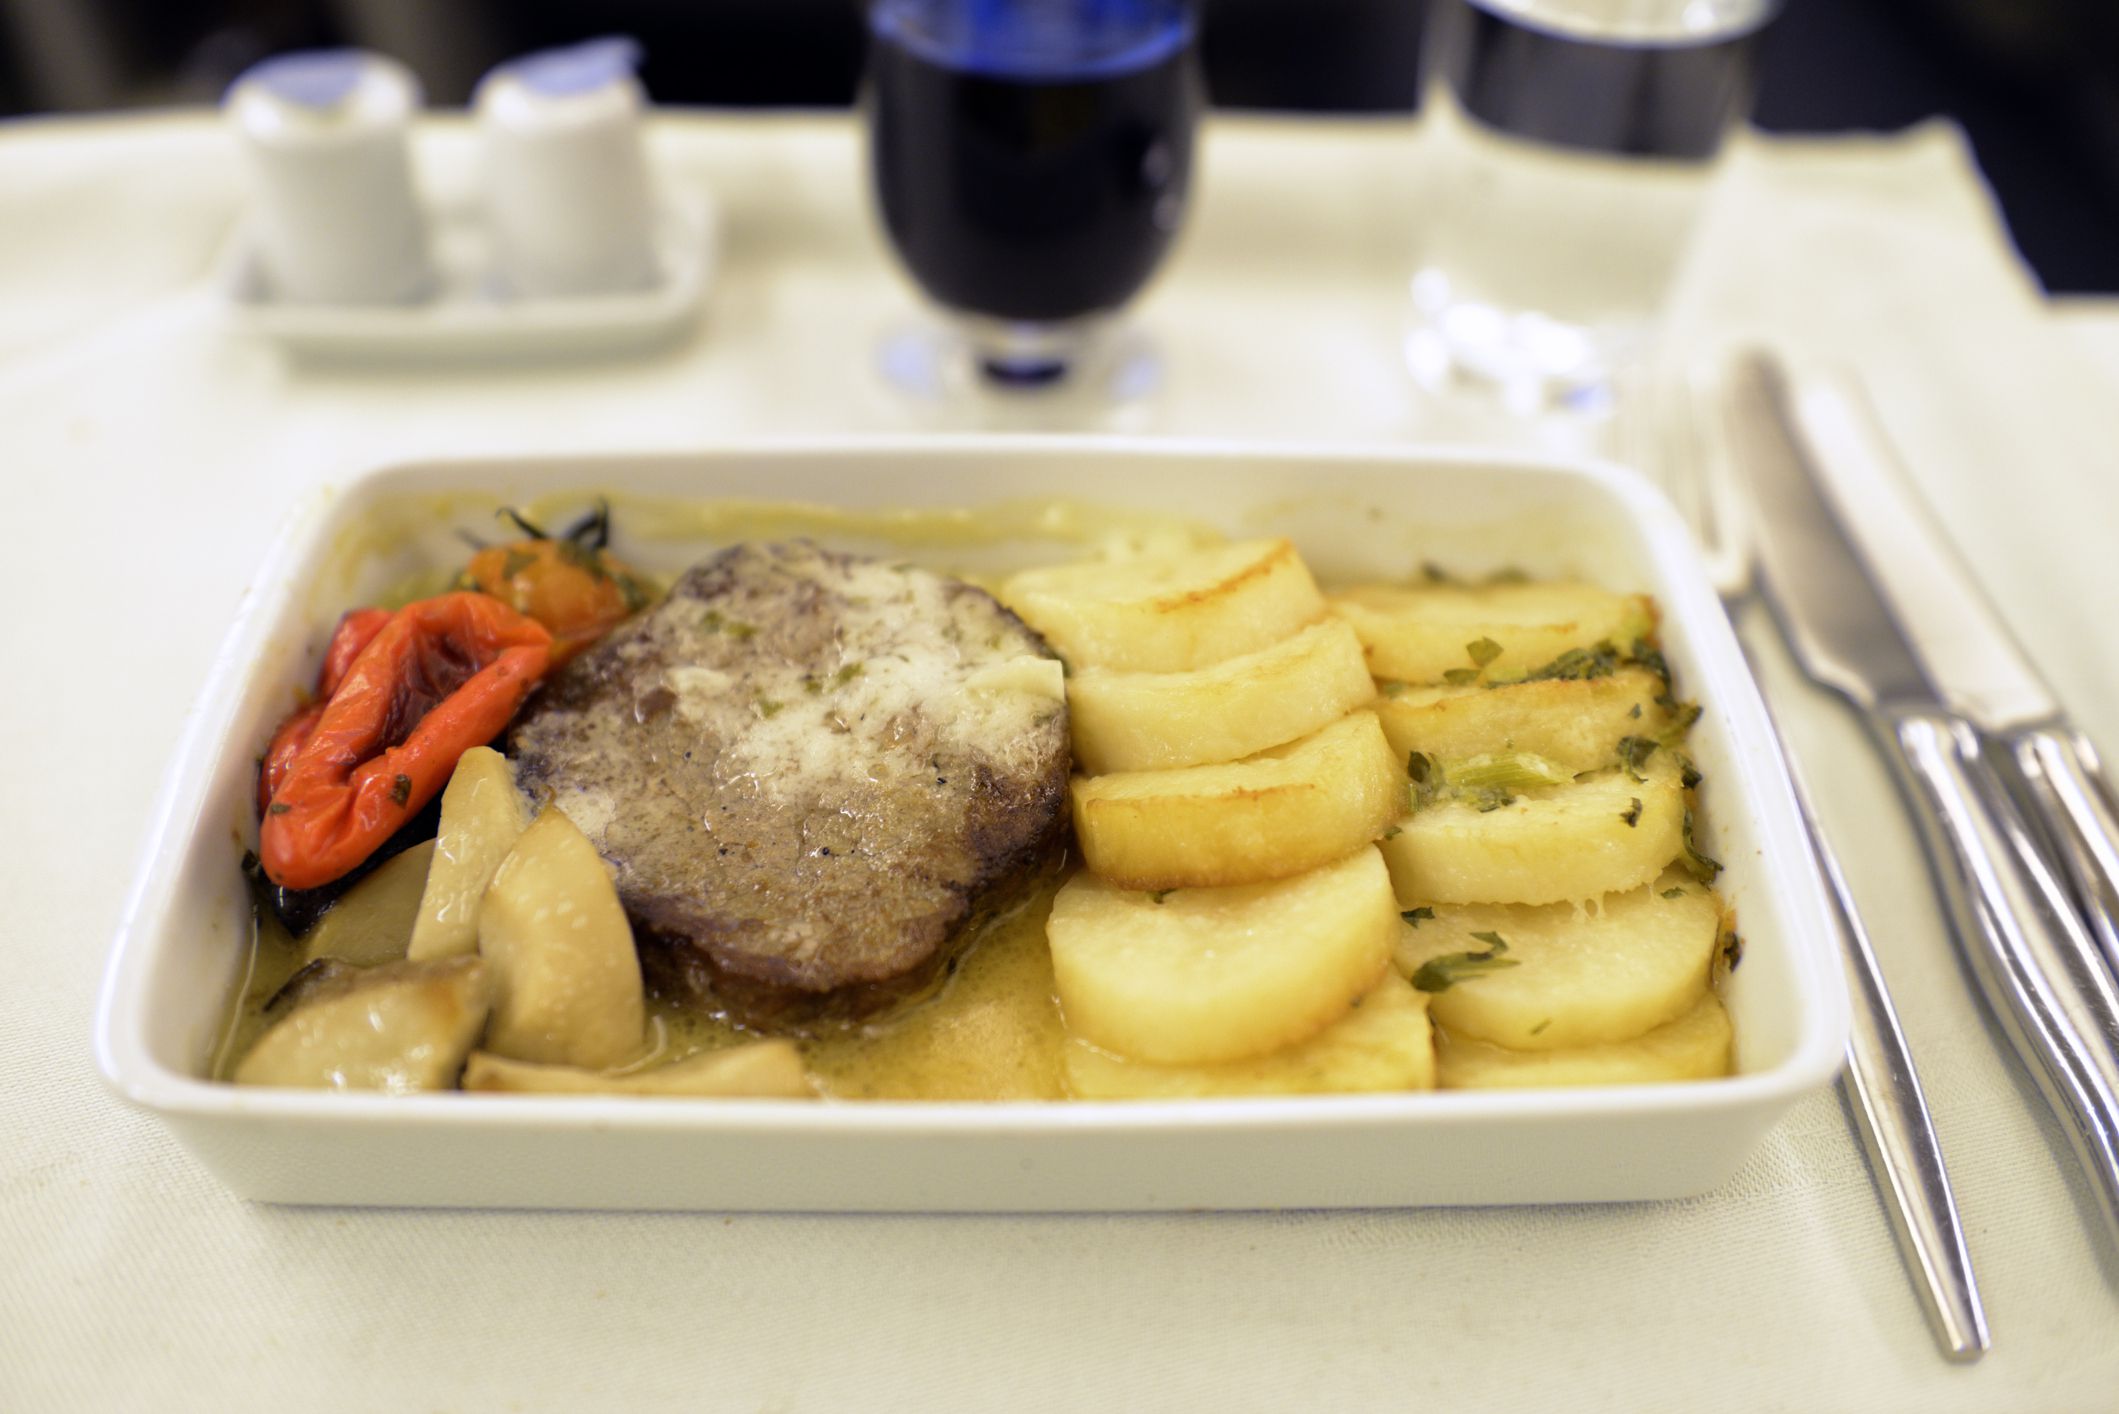 <p>If you have the option of steak for your in-flight meal, it's better to choose something else. Steak will almost always be overcooked because it has to be pre-cooked and reheated on the plane. So unless you love tough, chewy, gray beef, go for chicken or pasta. </p><p><b>Related:</b> <a href="https://blog.cheapism.com/things-to-never-do-on-airplane/">Things You Should Never, Ever Do on a Plane</a></p>